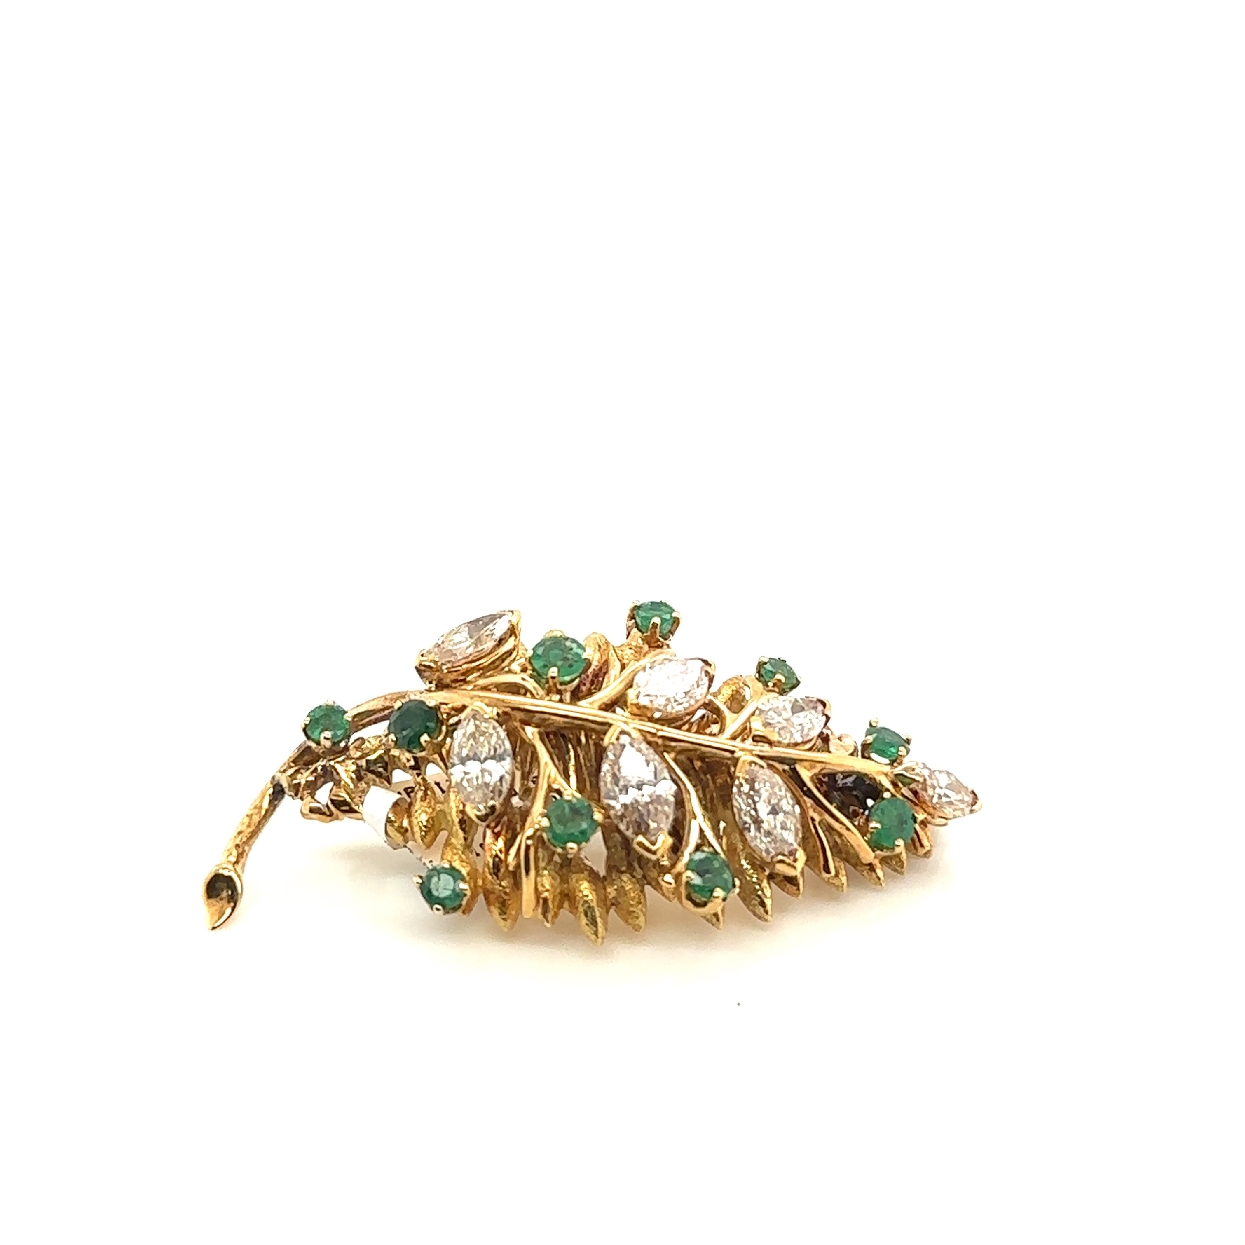 18K Yellow Gold Emerald and Marquis Diamond Brooch with Leaf Filigree